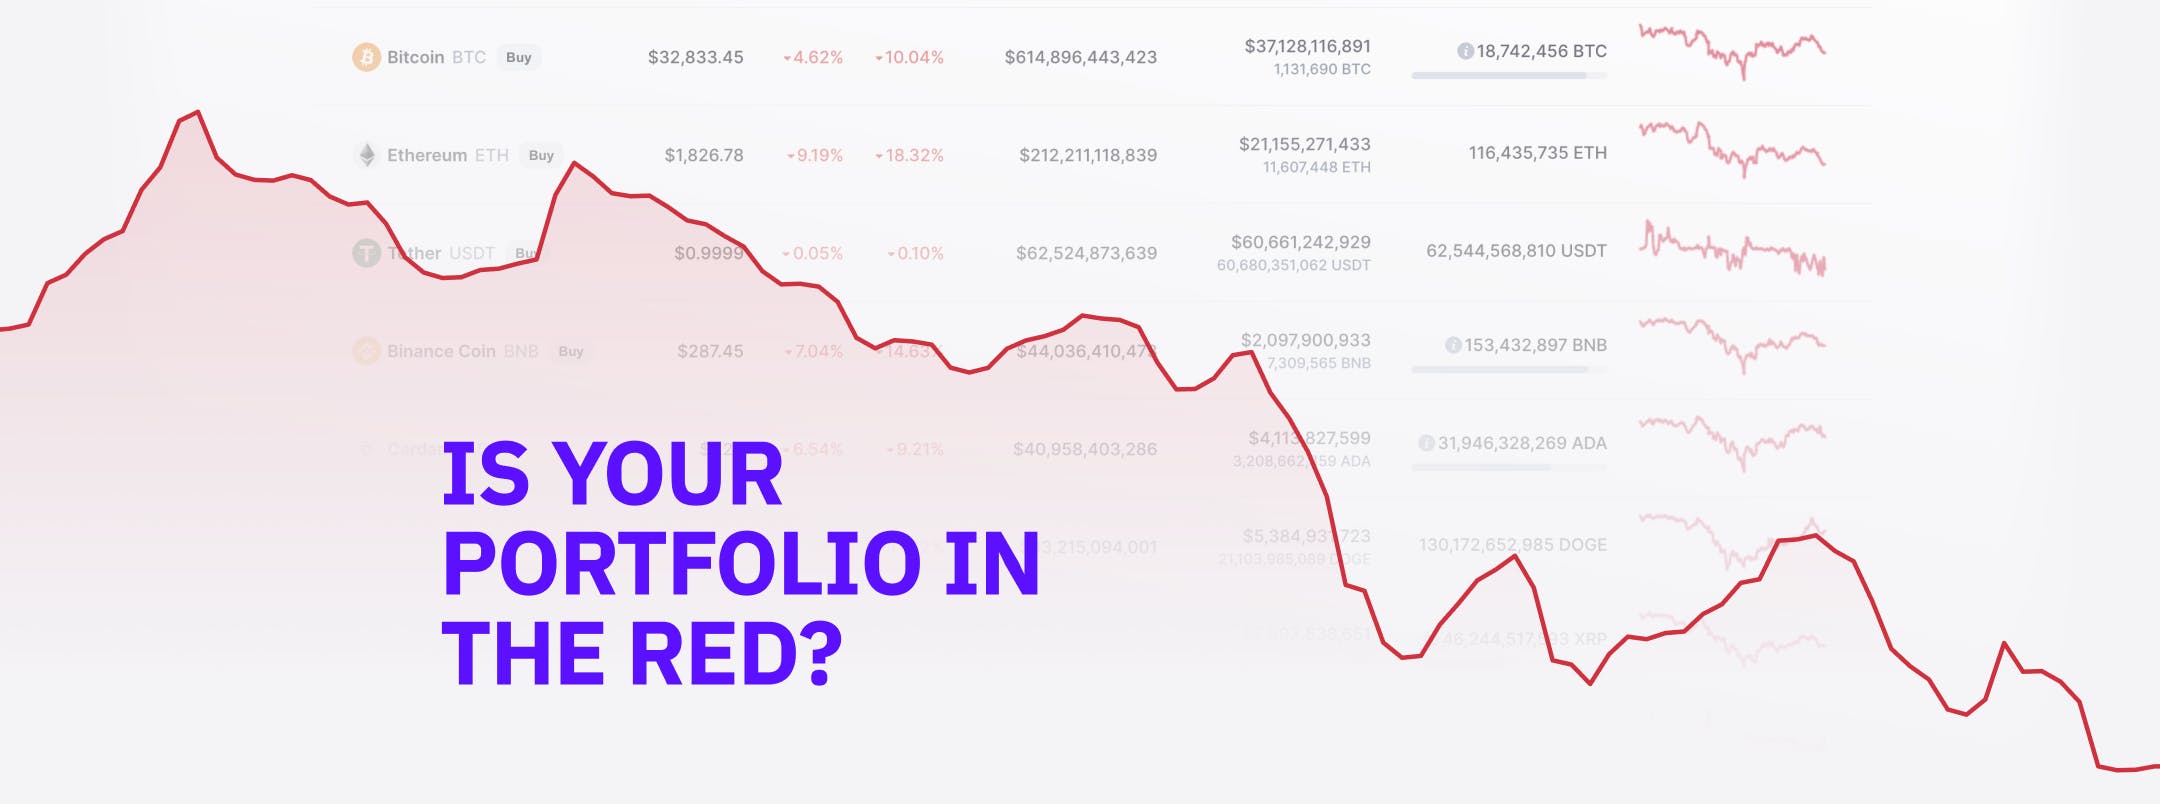 Is Your Portfolio in the Red? With These 3 Tips, the Next Crypto Crash Won't Matter!